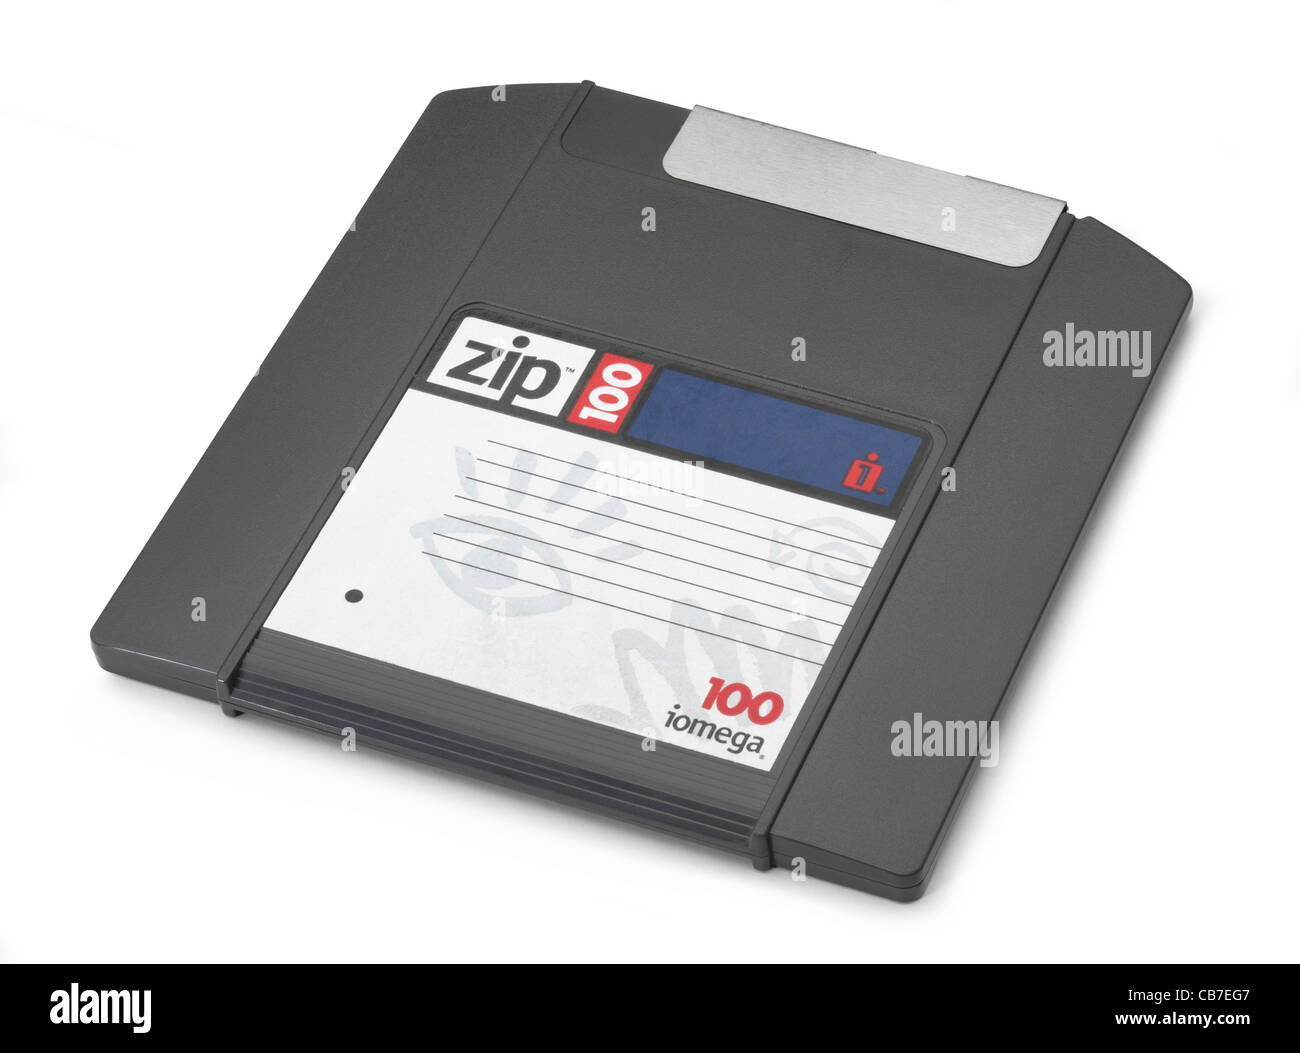 iomega Zip disk from 1994 Stock Photo